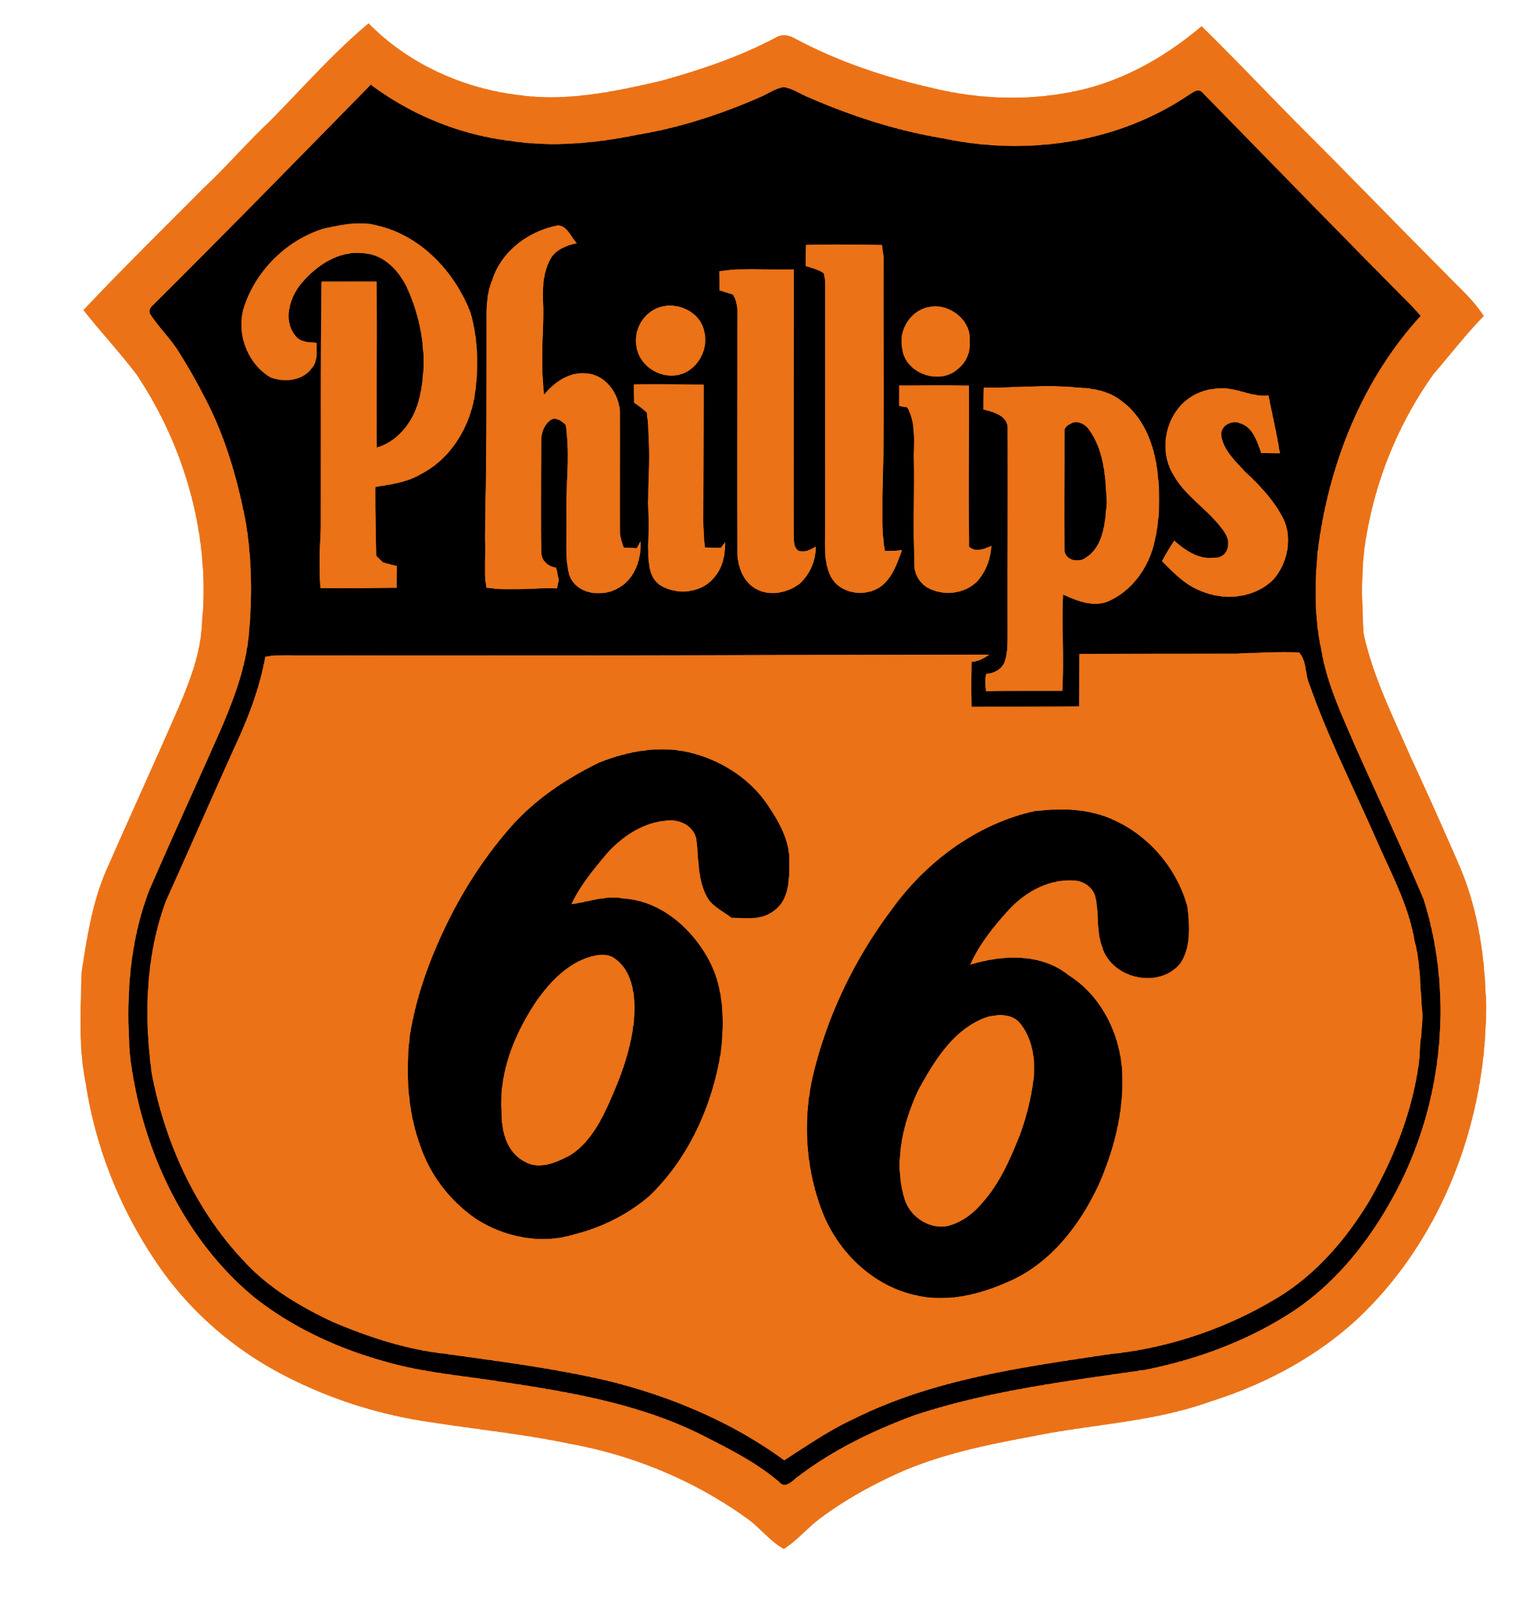 Phillips 66 Oil Gas sticker ORANGE Vinyl Decal |10 Sizes with TRACKING